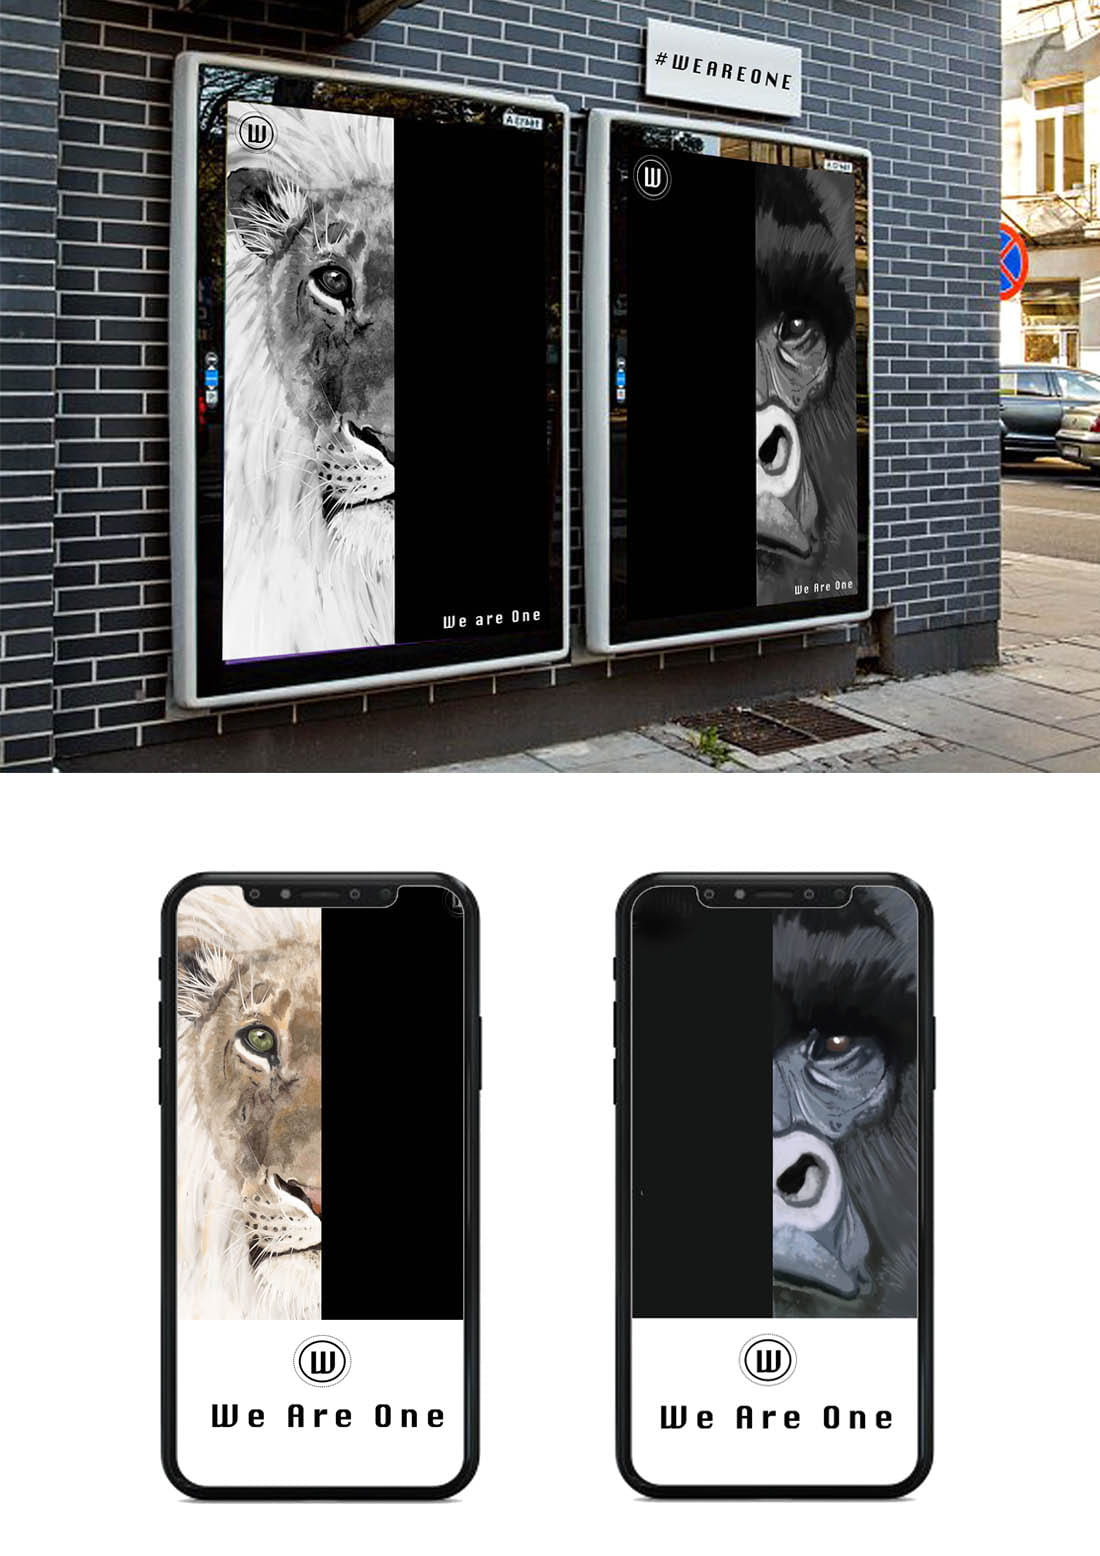 Image of advertising mockup in street and two iphone screen mockups.